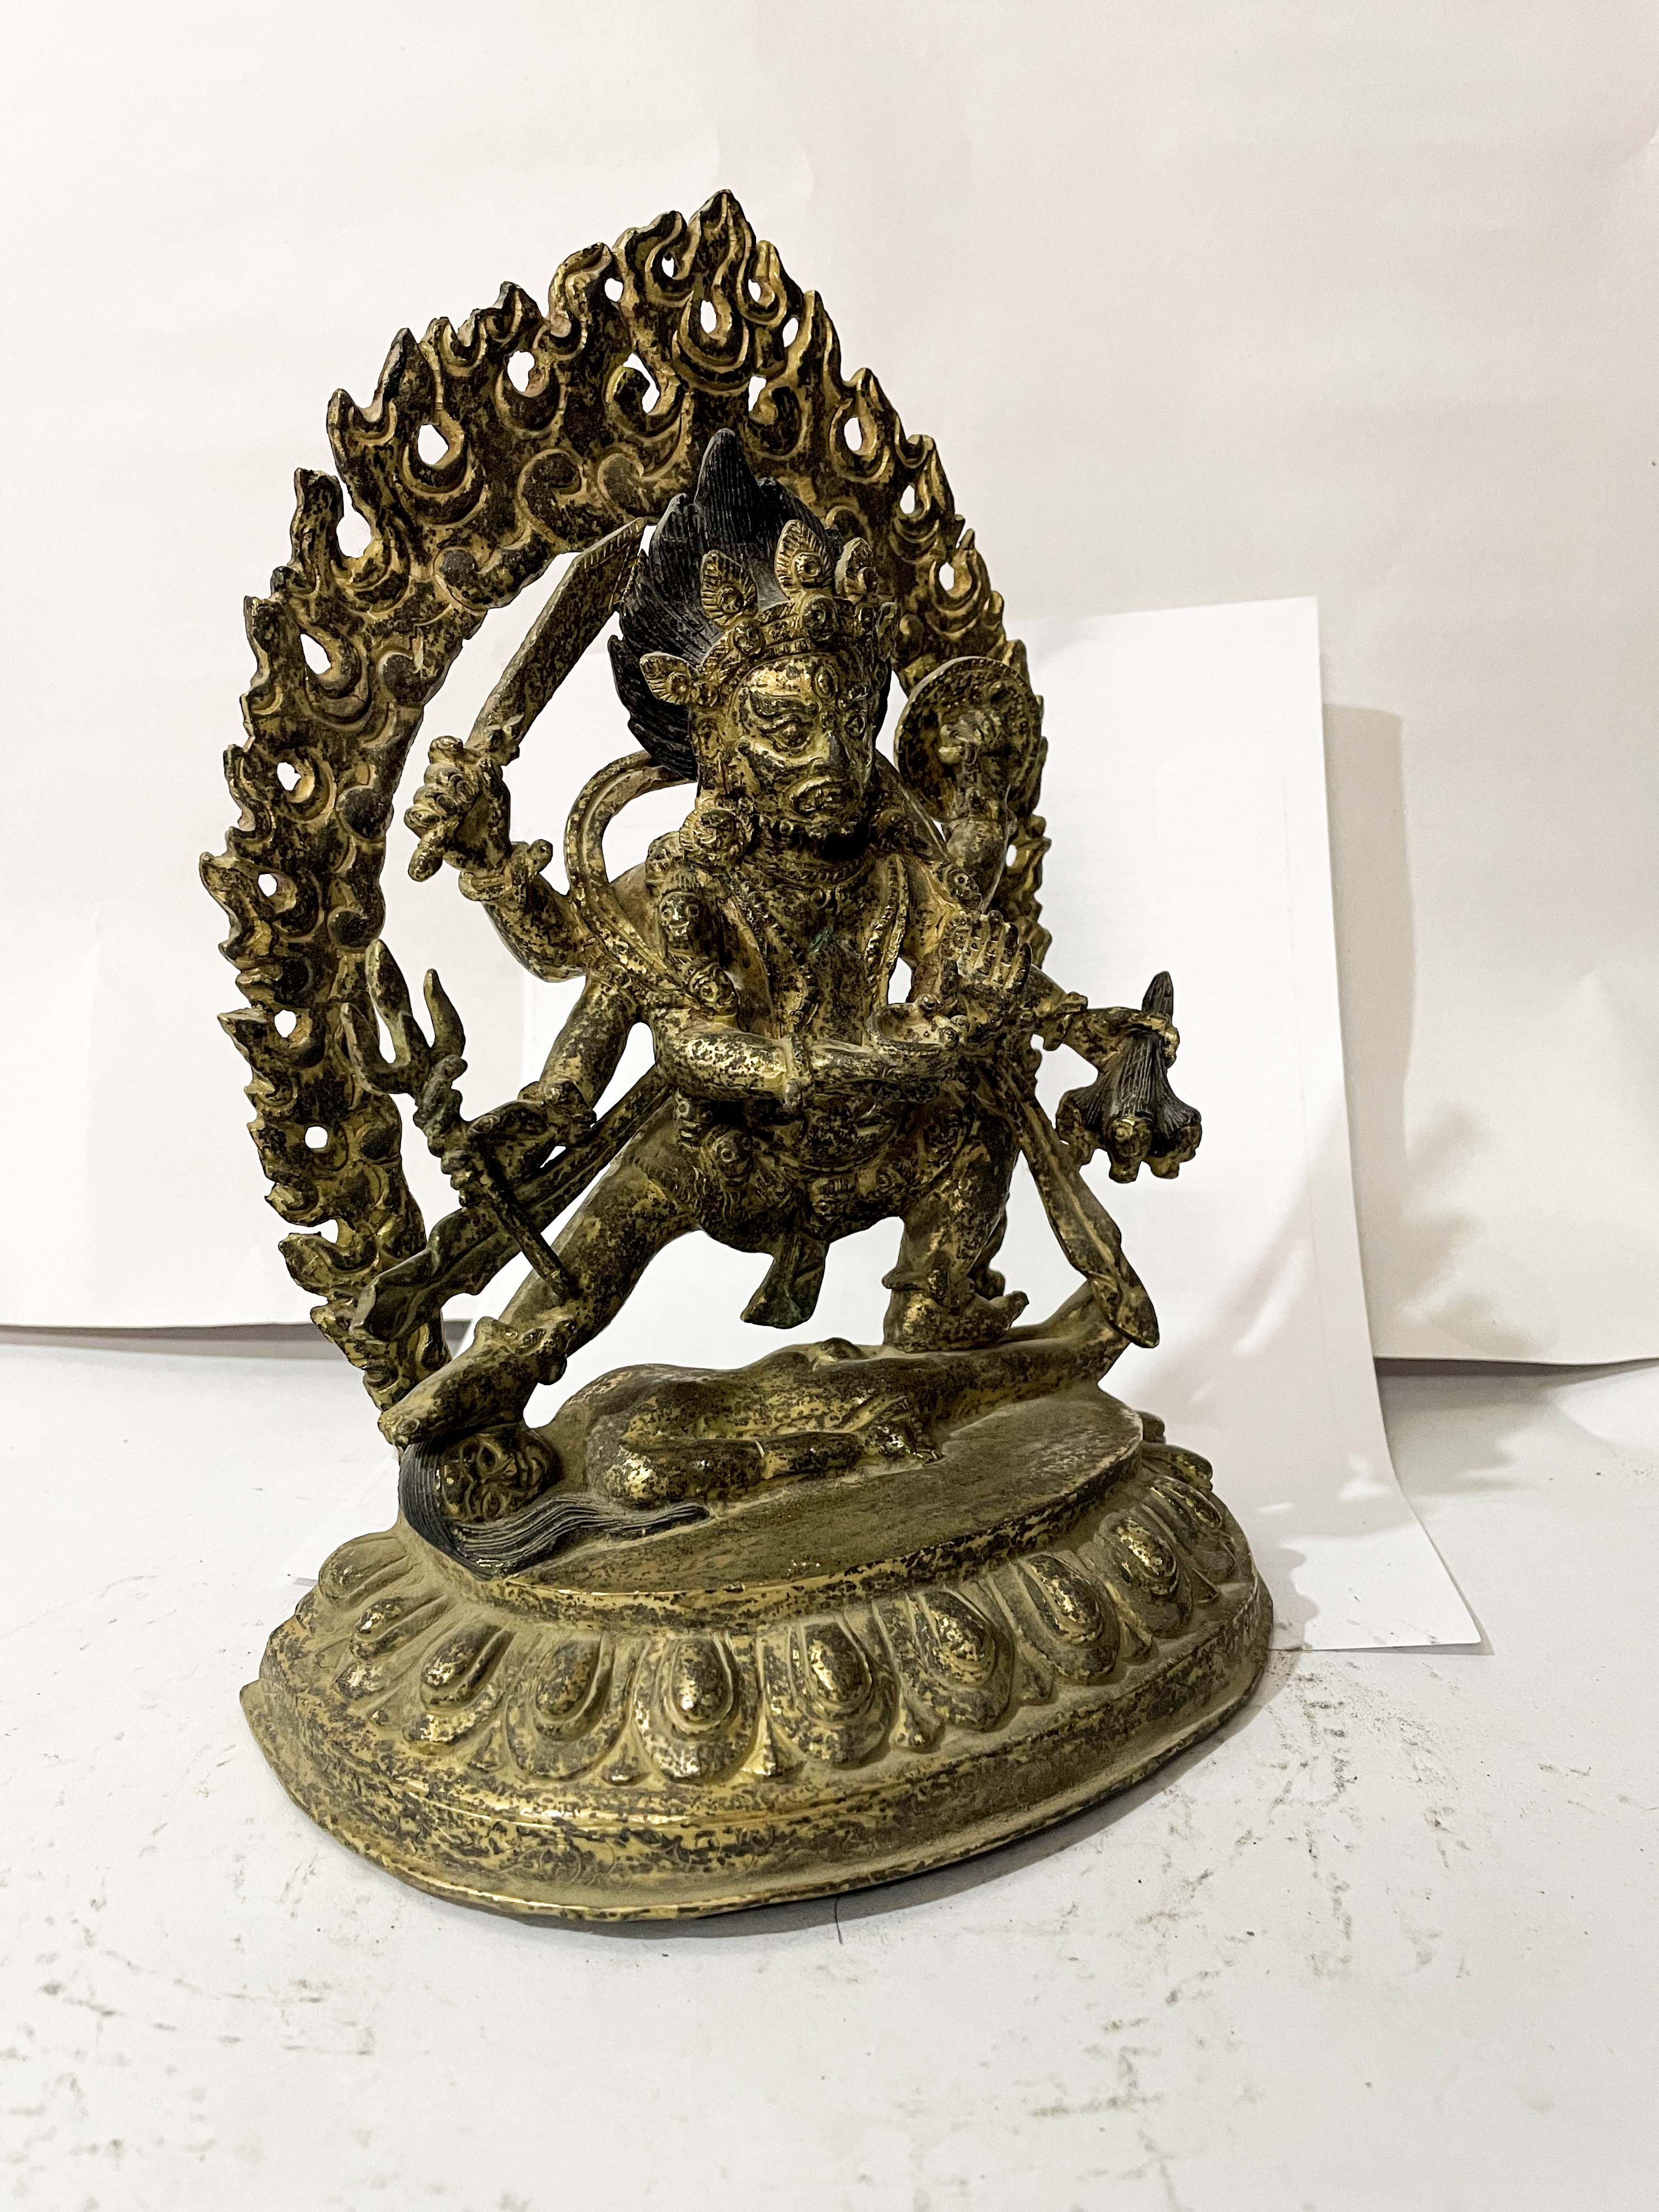 Hq, Buddhist Statue Of Akash Bhairav, gold Plated, Antique, rare Find